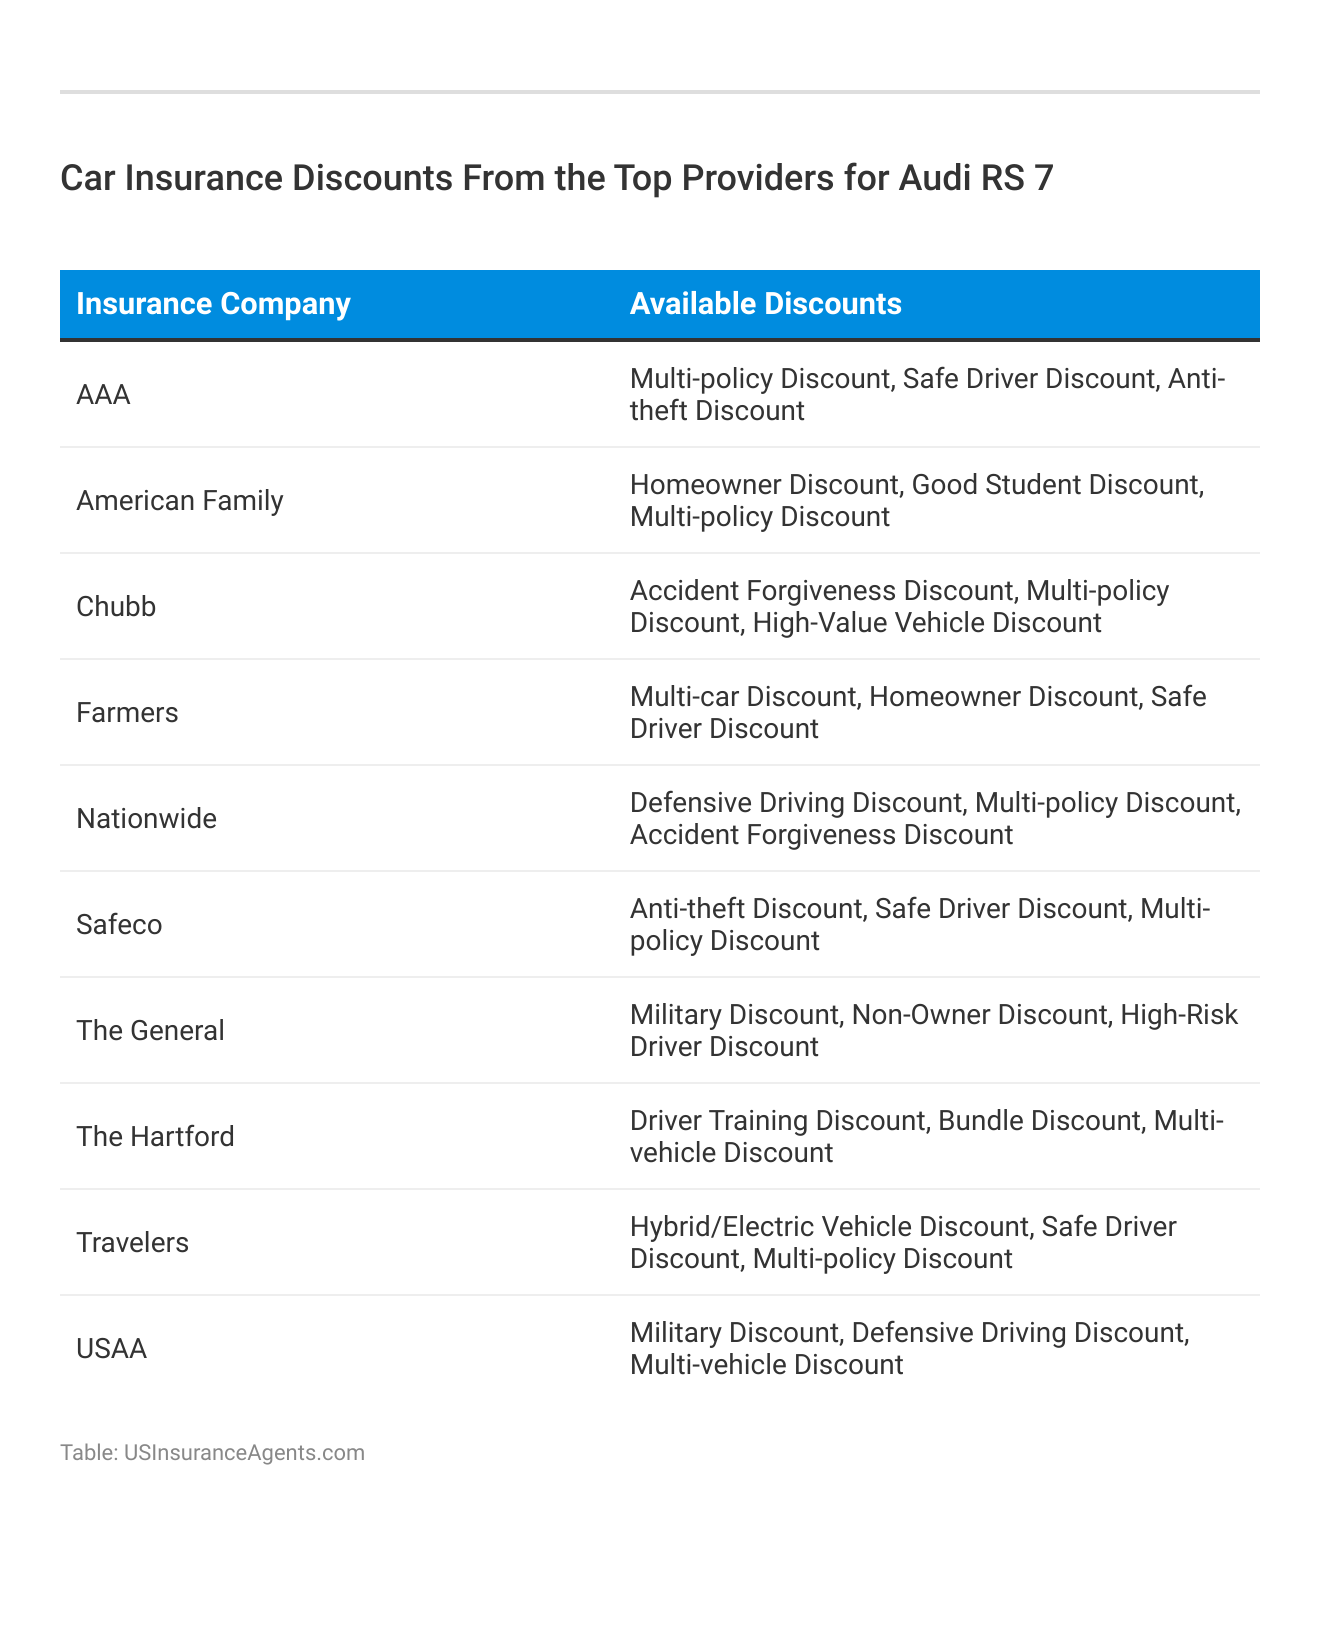 <h3>Car Insurance Discounts From the Top Providers for Audi RS 7</h3>